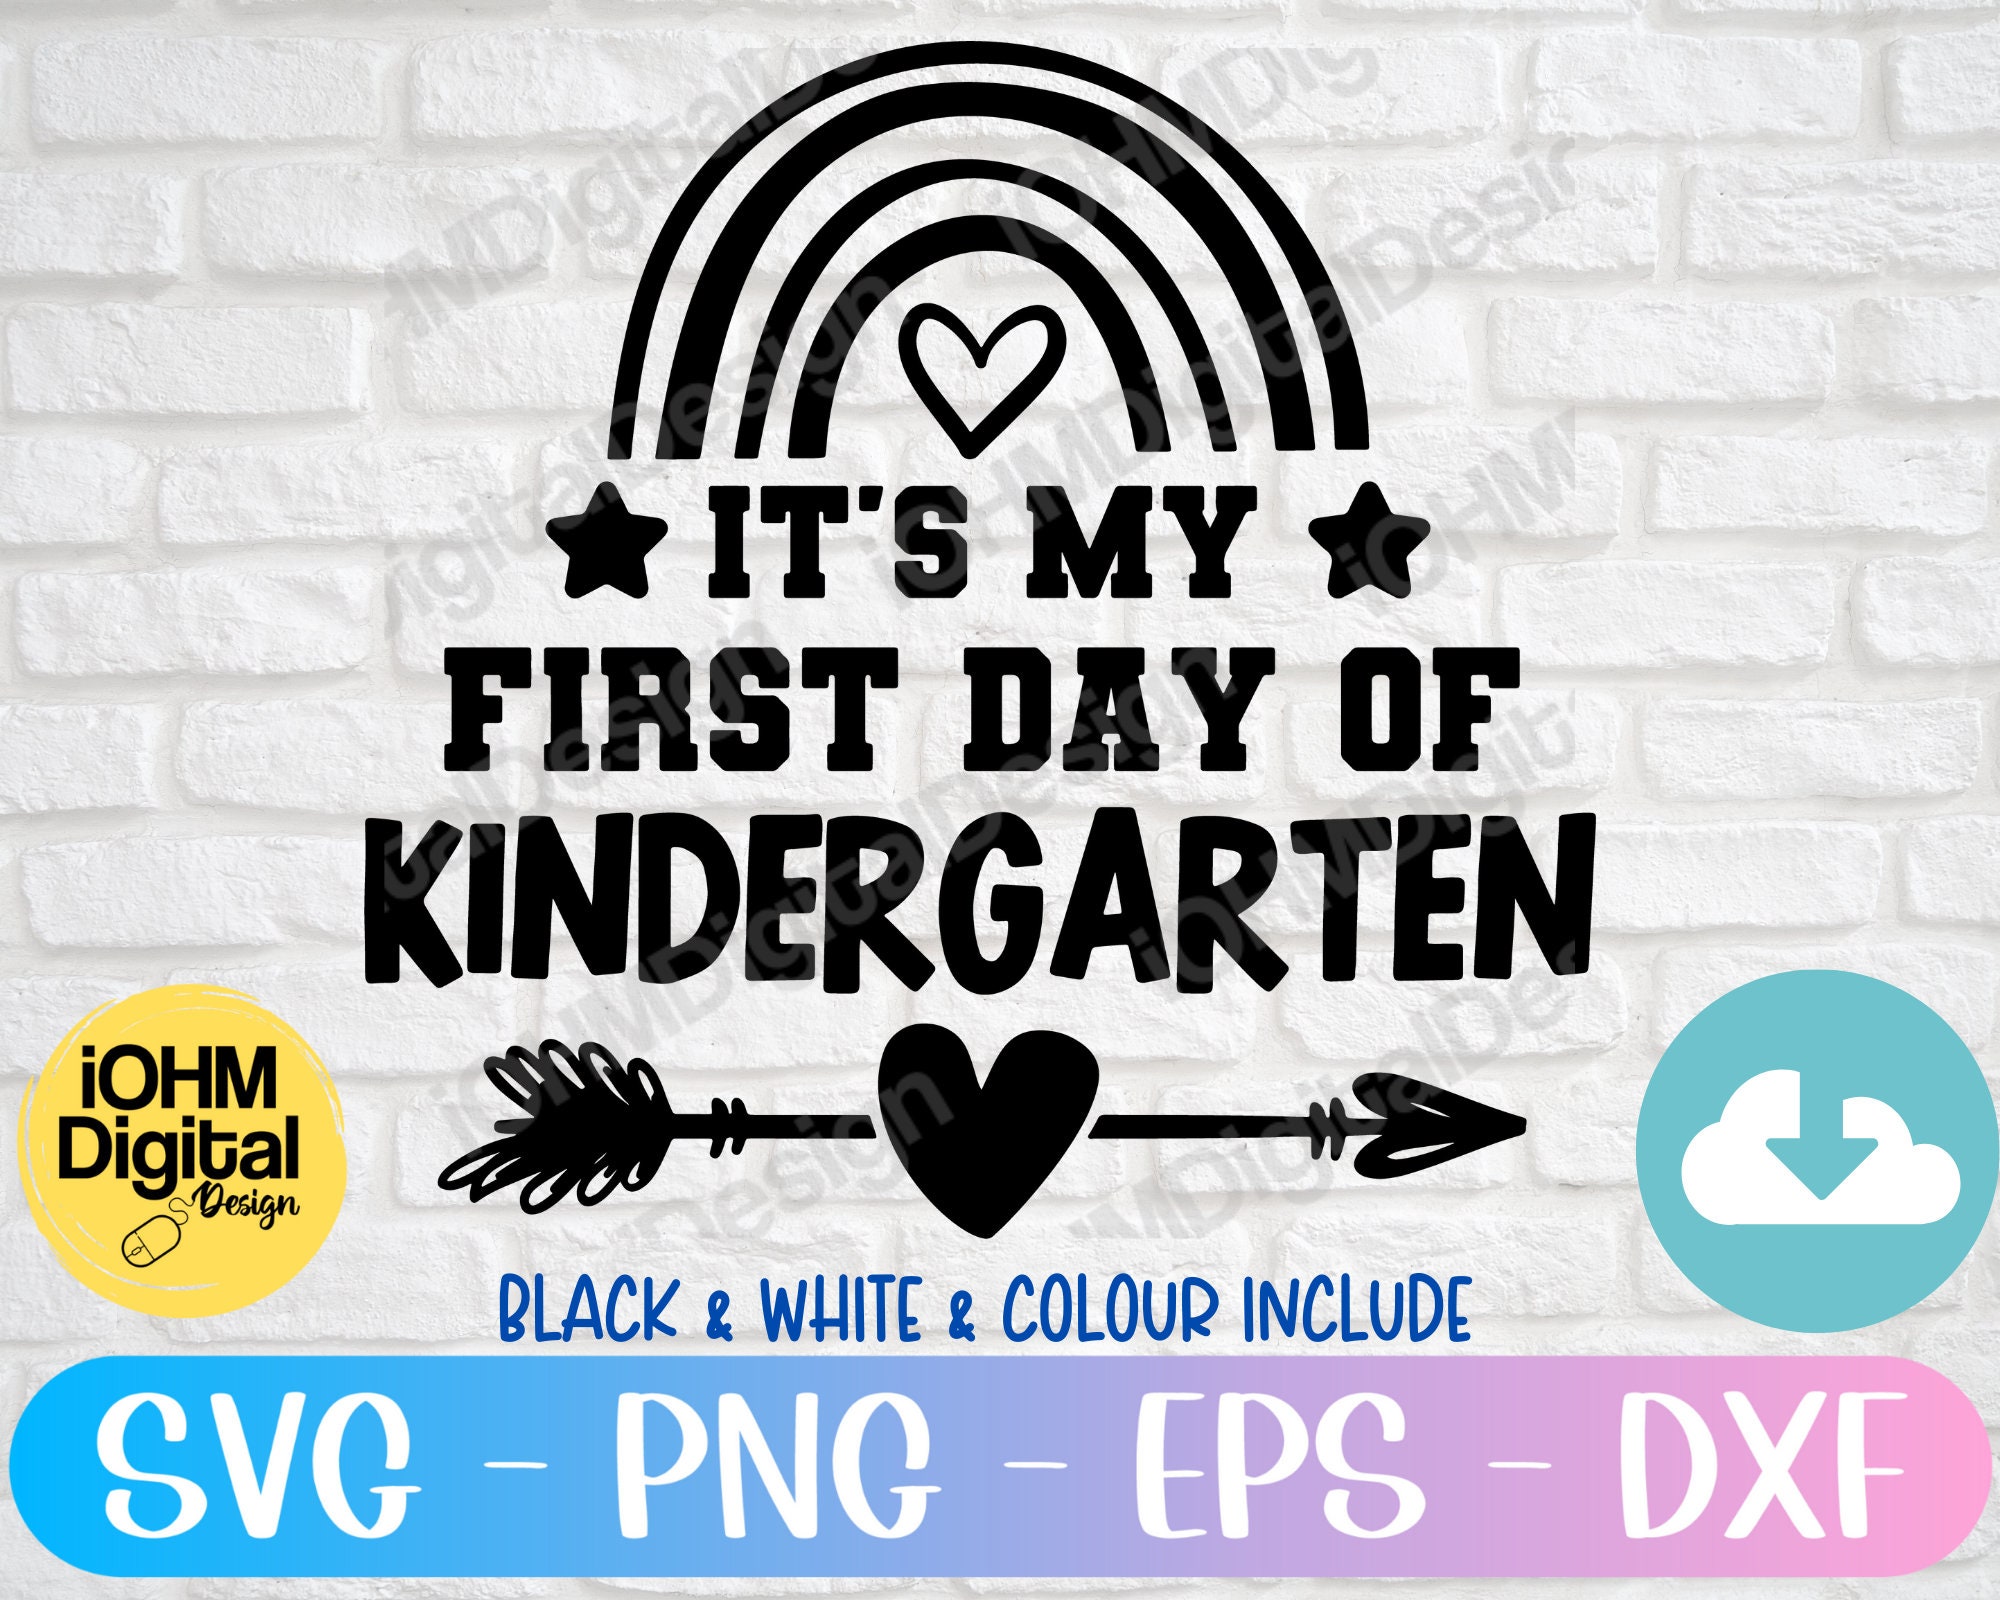 Its My First Day Of Kindergarten Svg Png Eps Dxf Cut File Etsy Uk